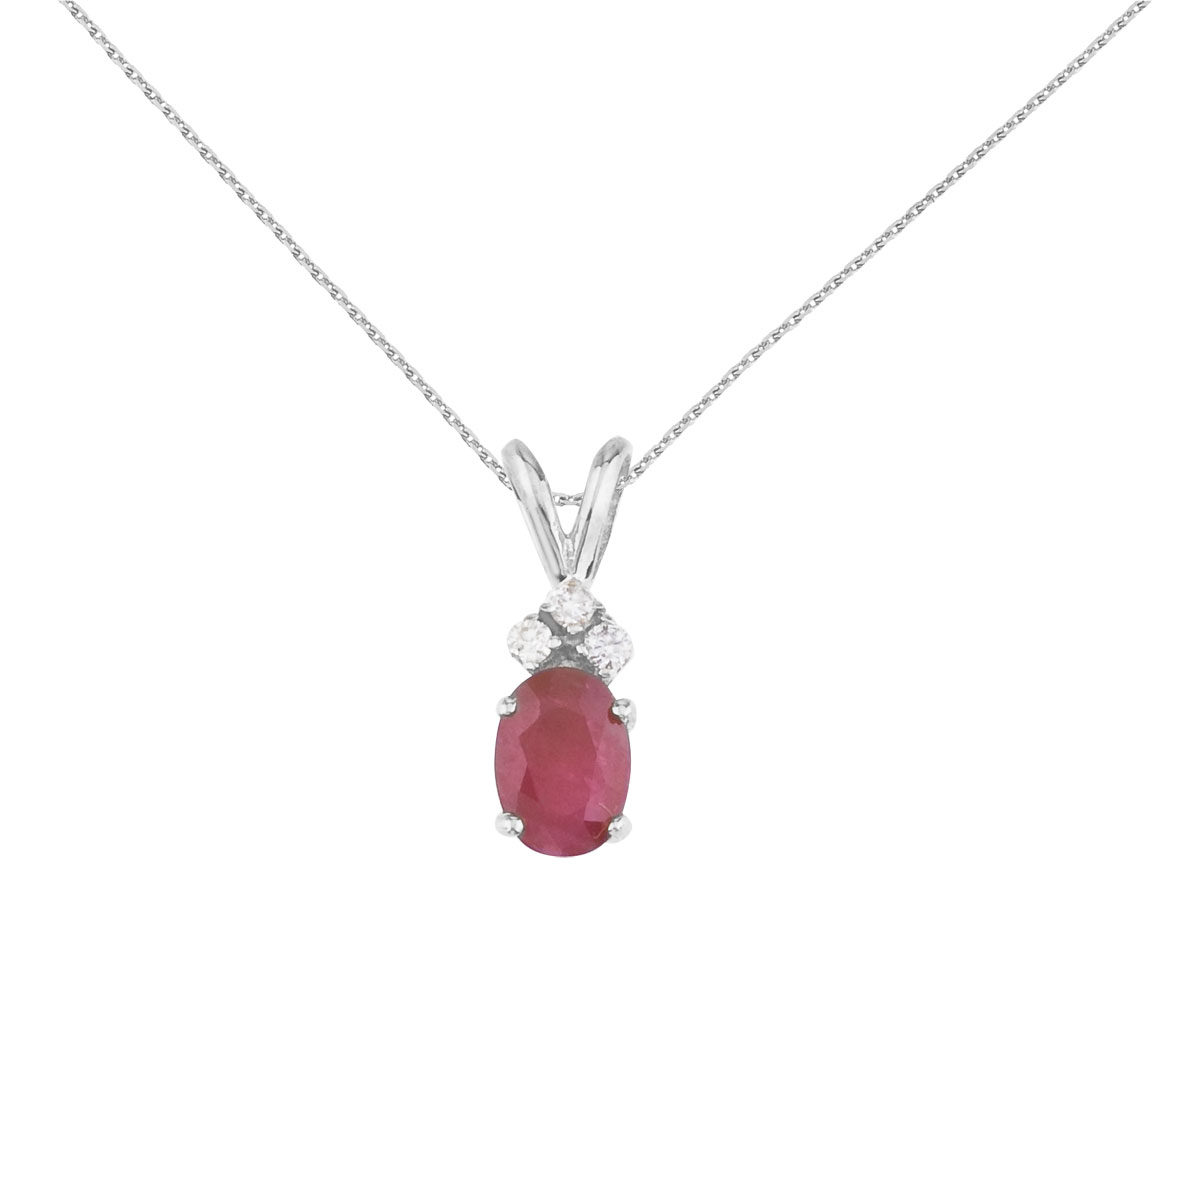 JCX2697: 7x5 mm oval natural ruby pendant topped with 3 bright diamonds set in 14k white gold.